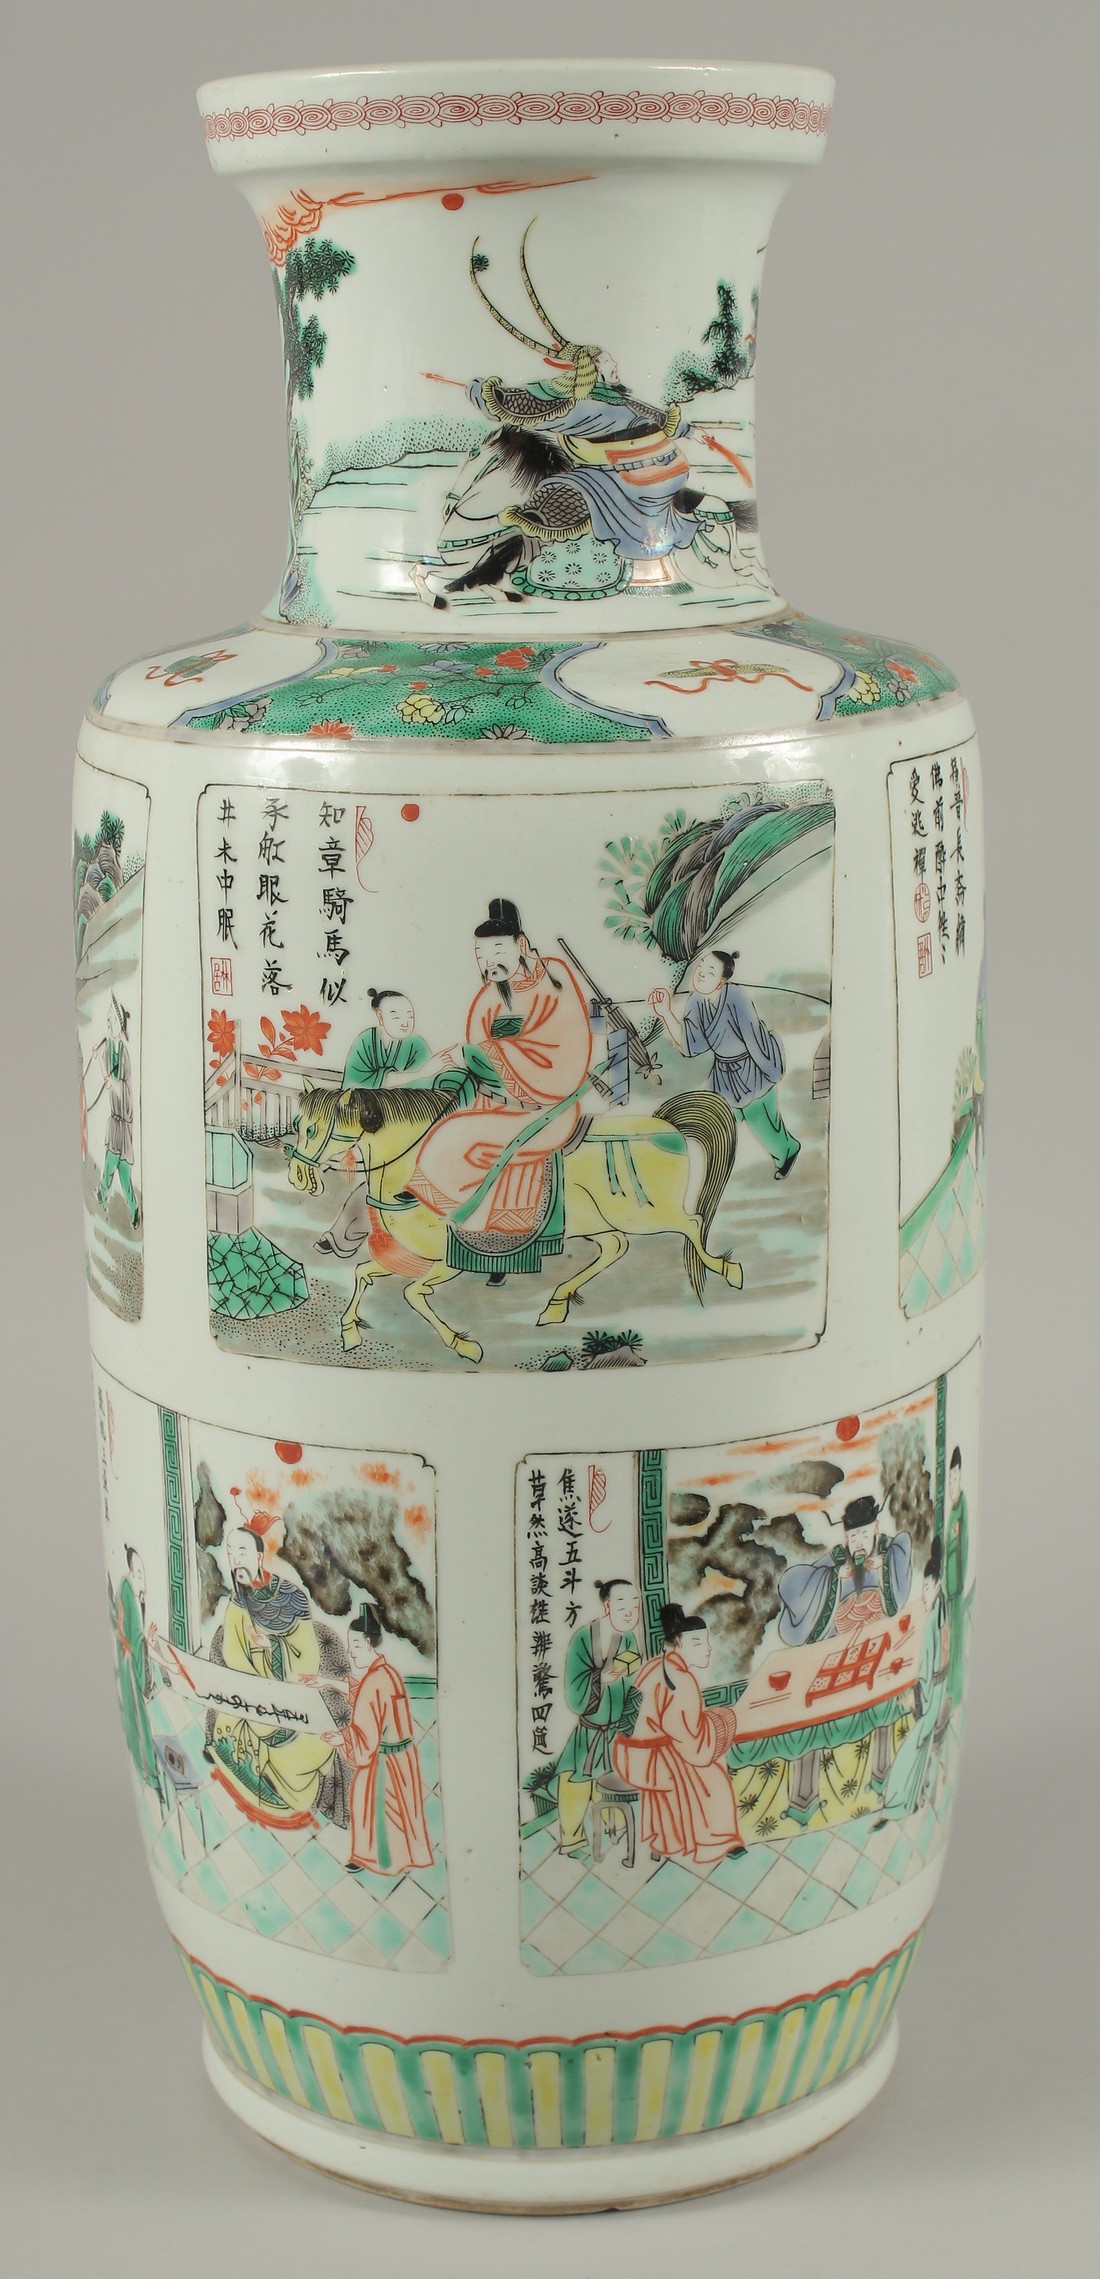 A LARGE CHINESE FAMILLE VERTE PORCELAIN VASE, painted with panels of various scenes with